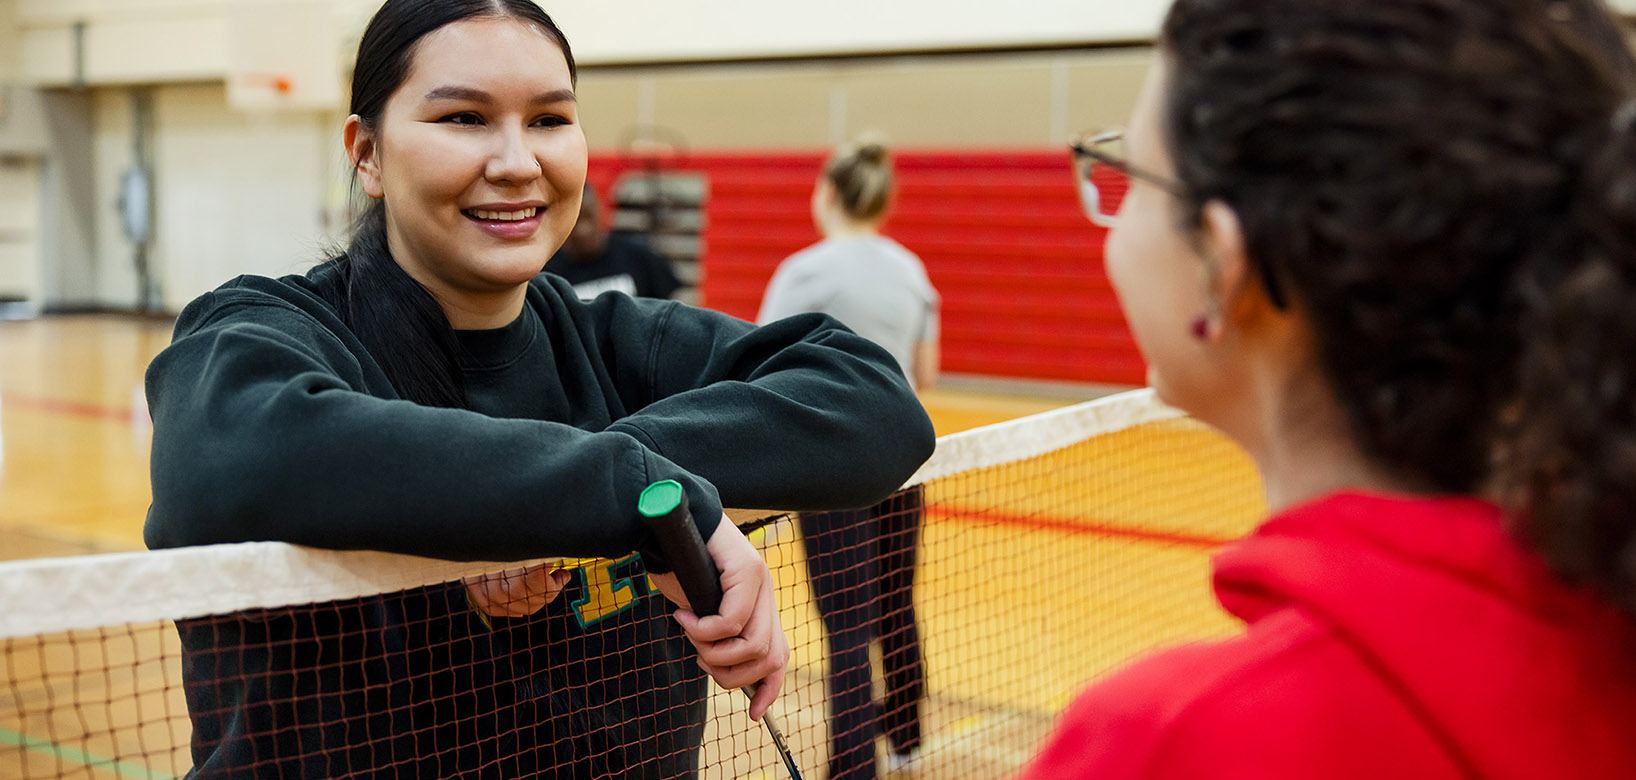 A student leaning on a badminton net as she talks with another student.